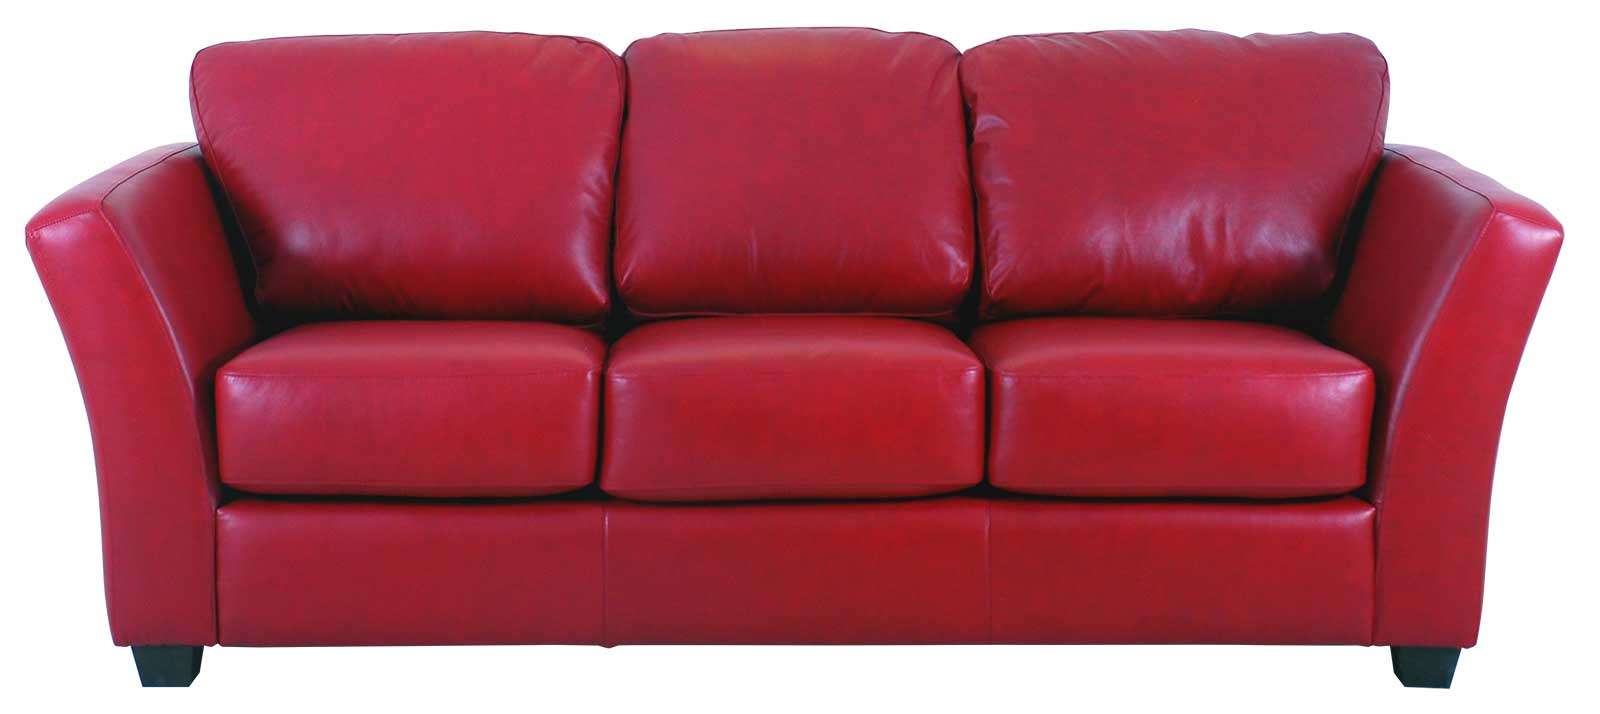 DECORATING WITH A RED LEATHER COUCH